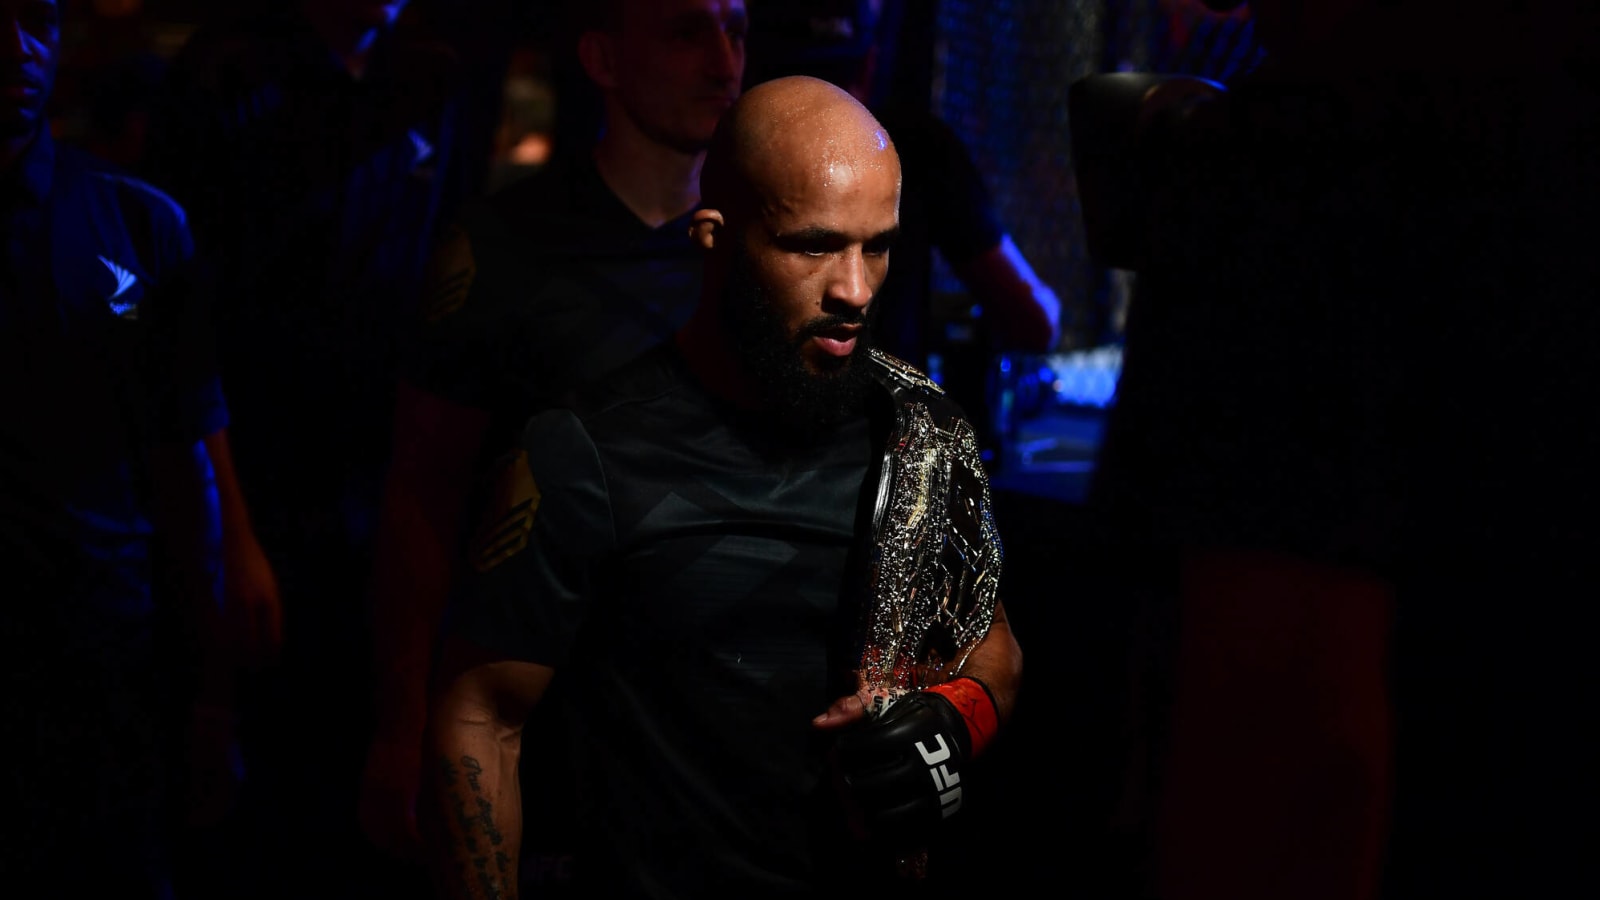 Demetrious Johnson got around $75,000 from EA for being in UFC game despite leaving promotion